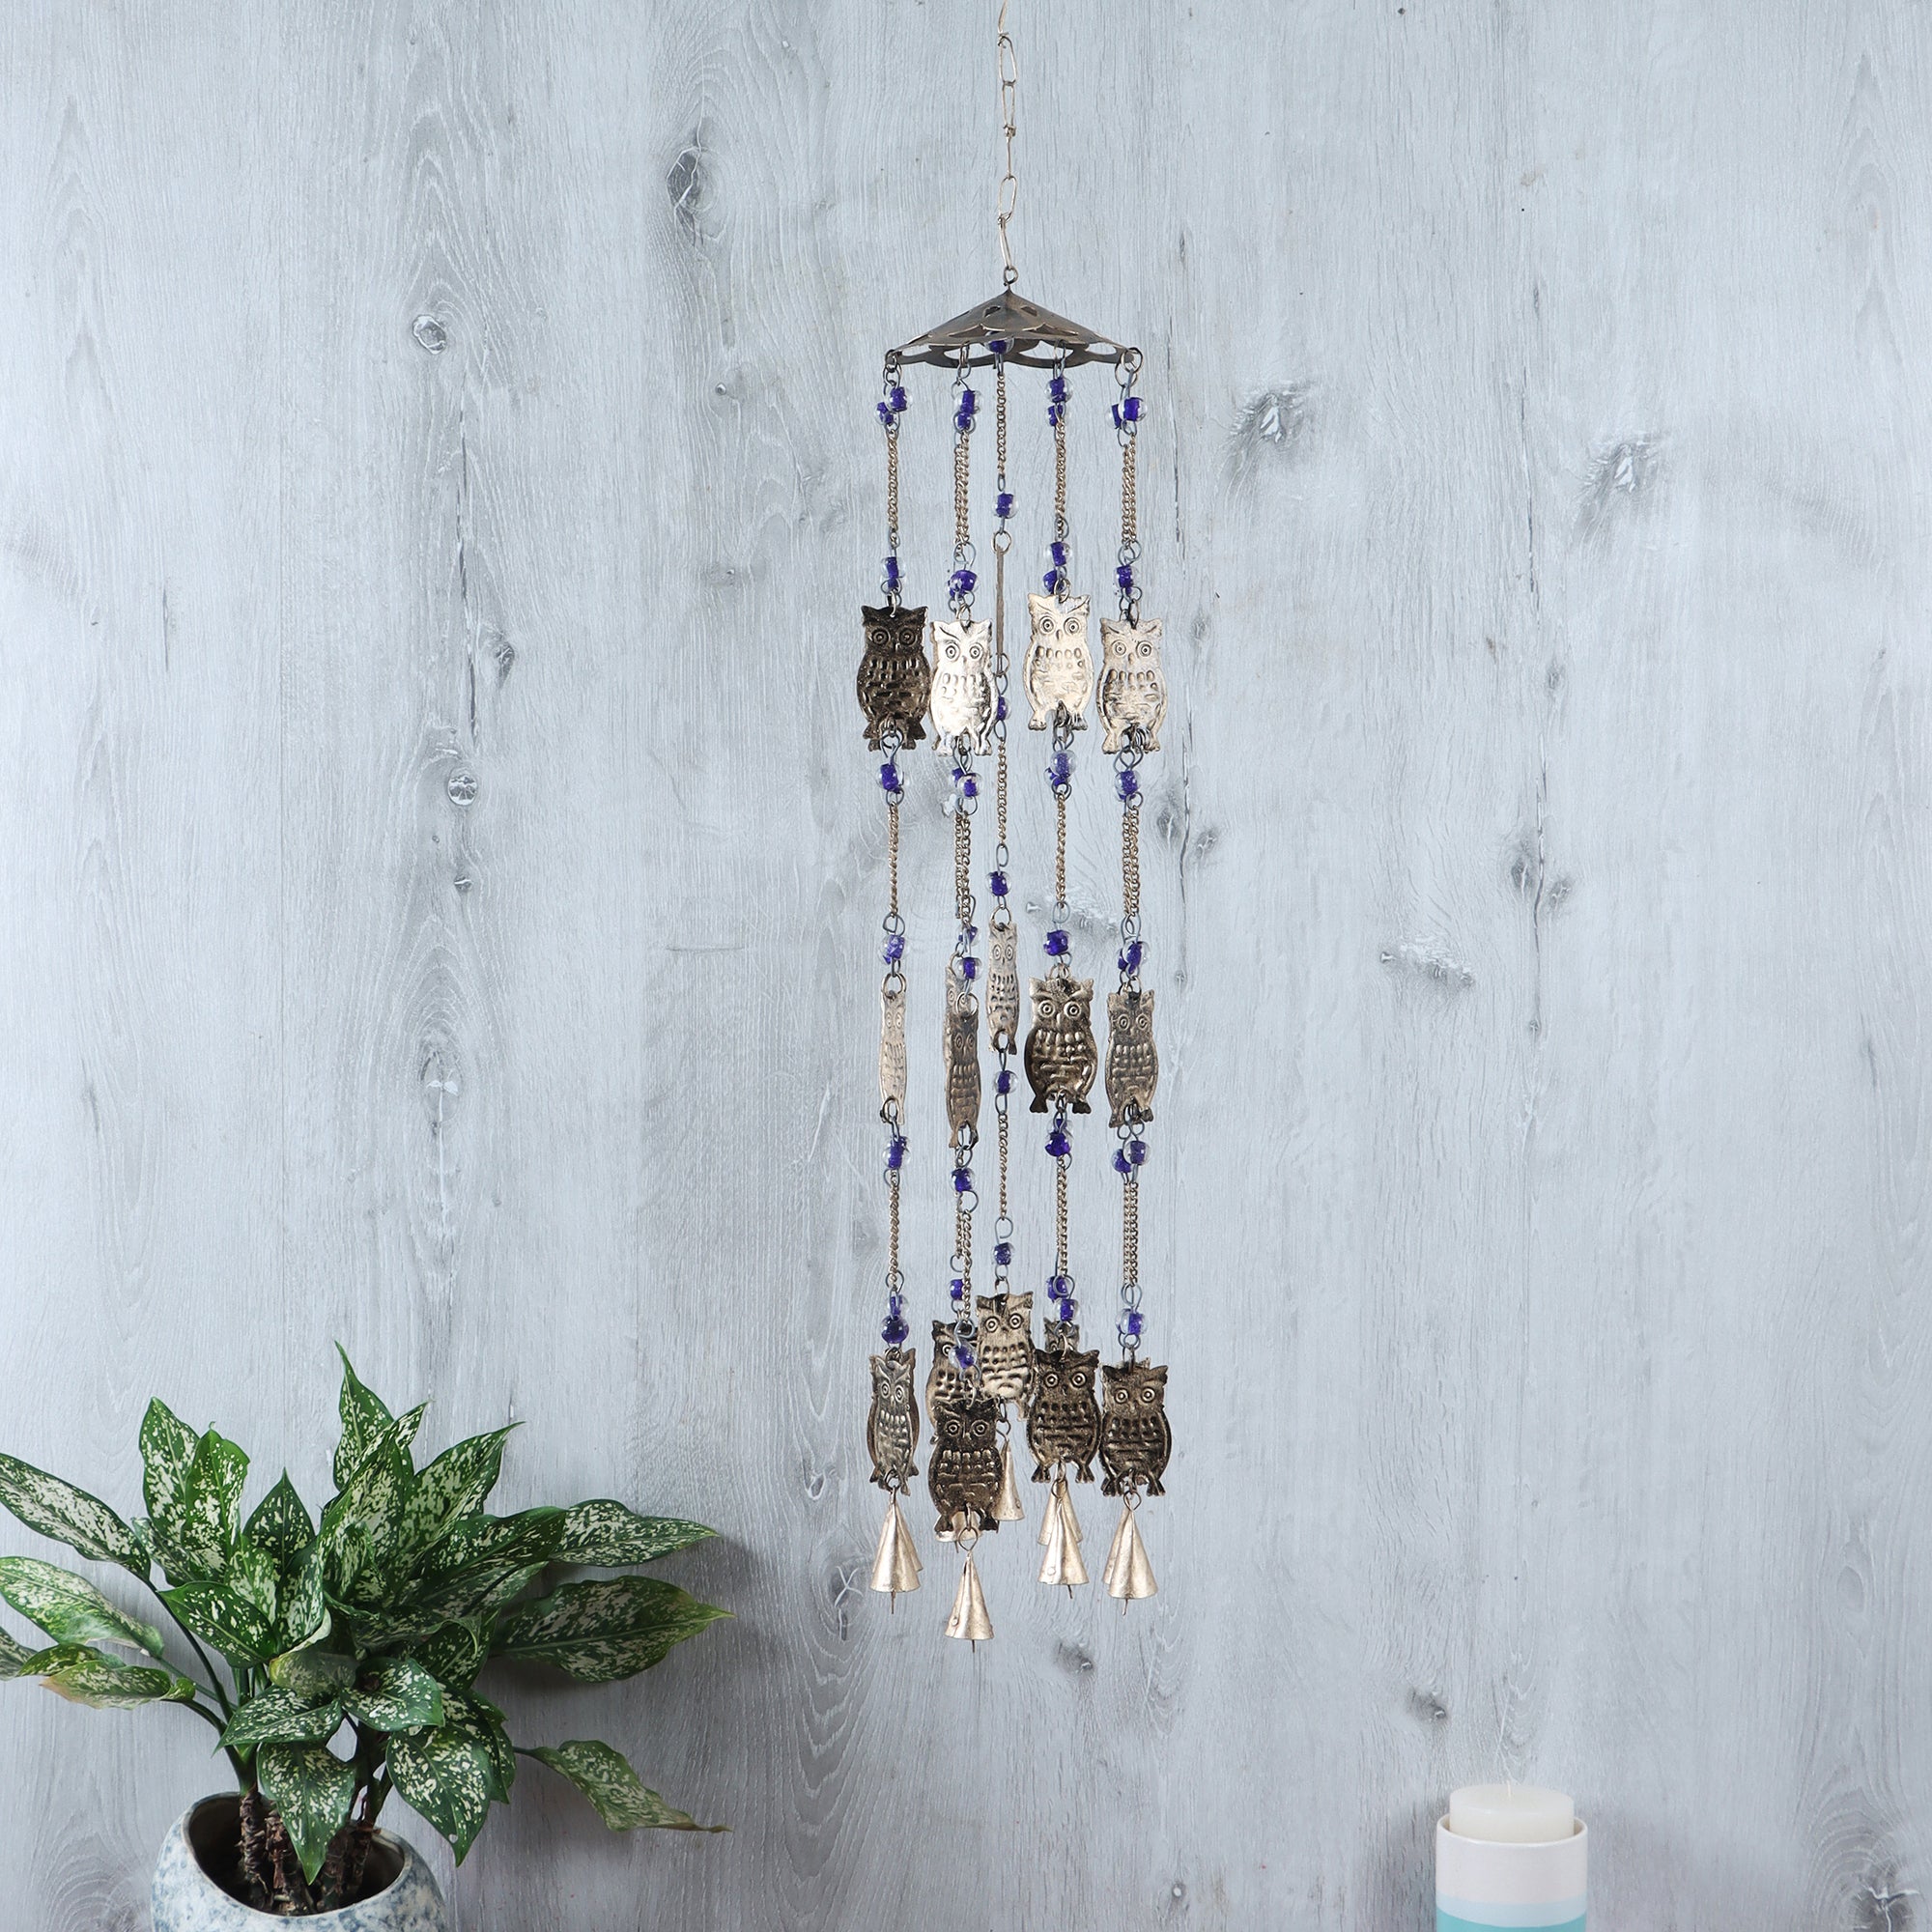 The Curious Owl Wind Chime